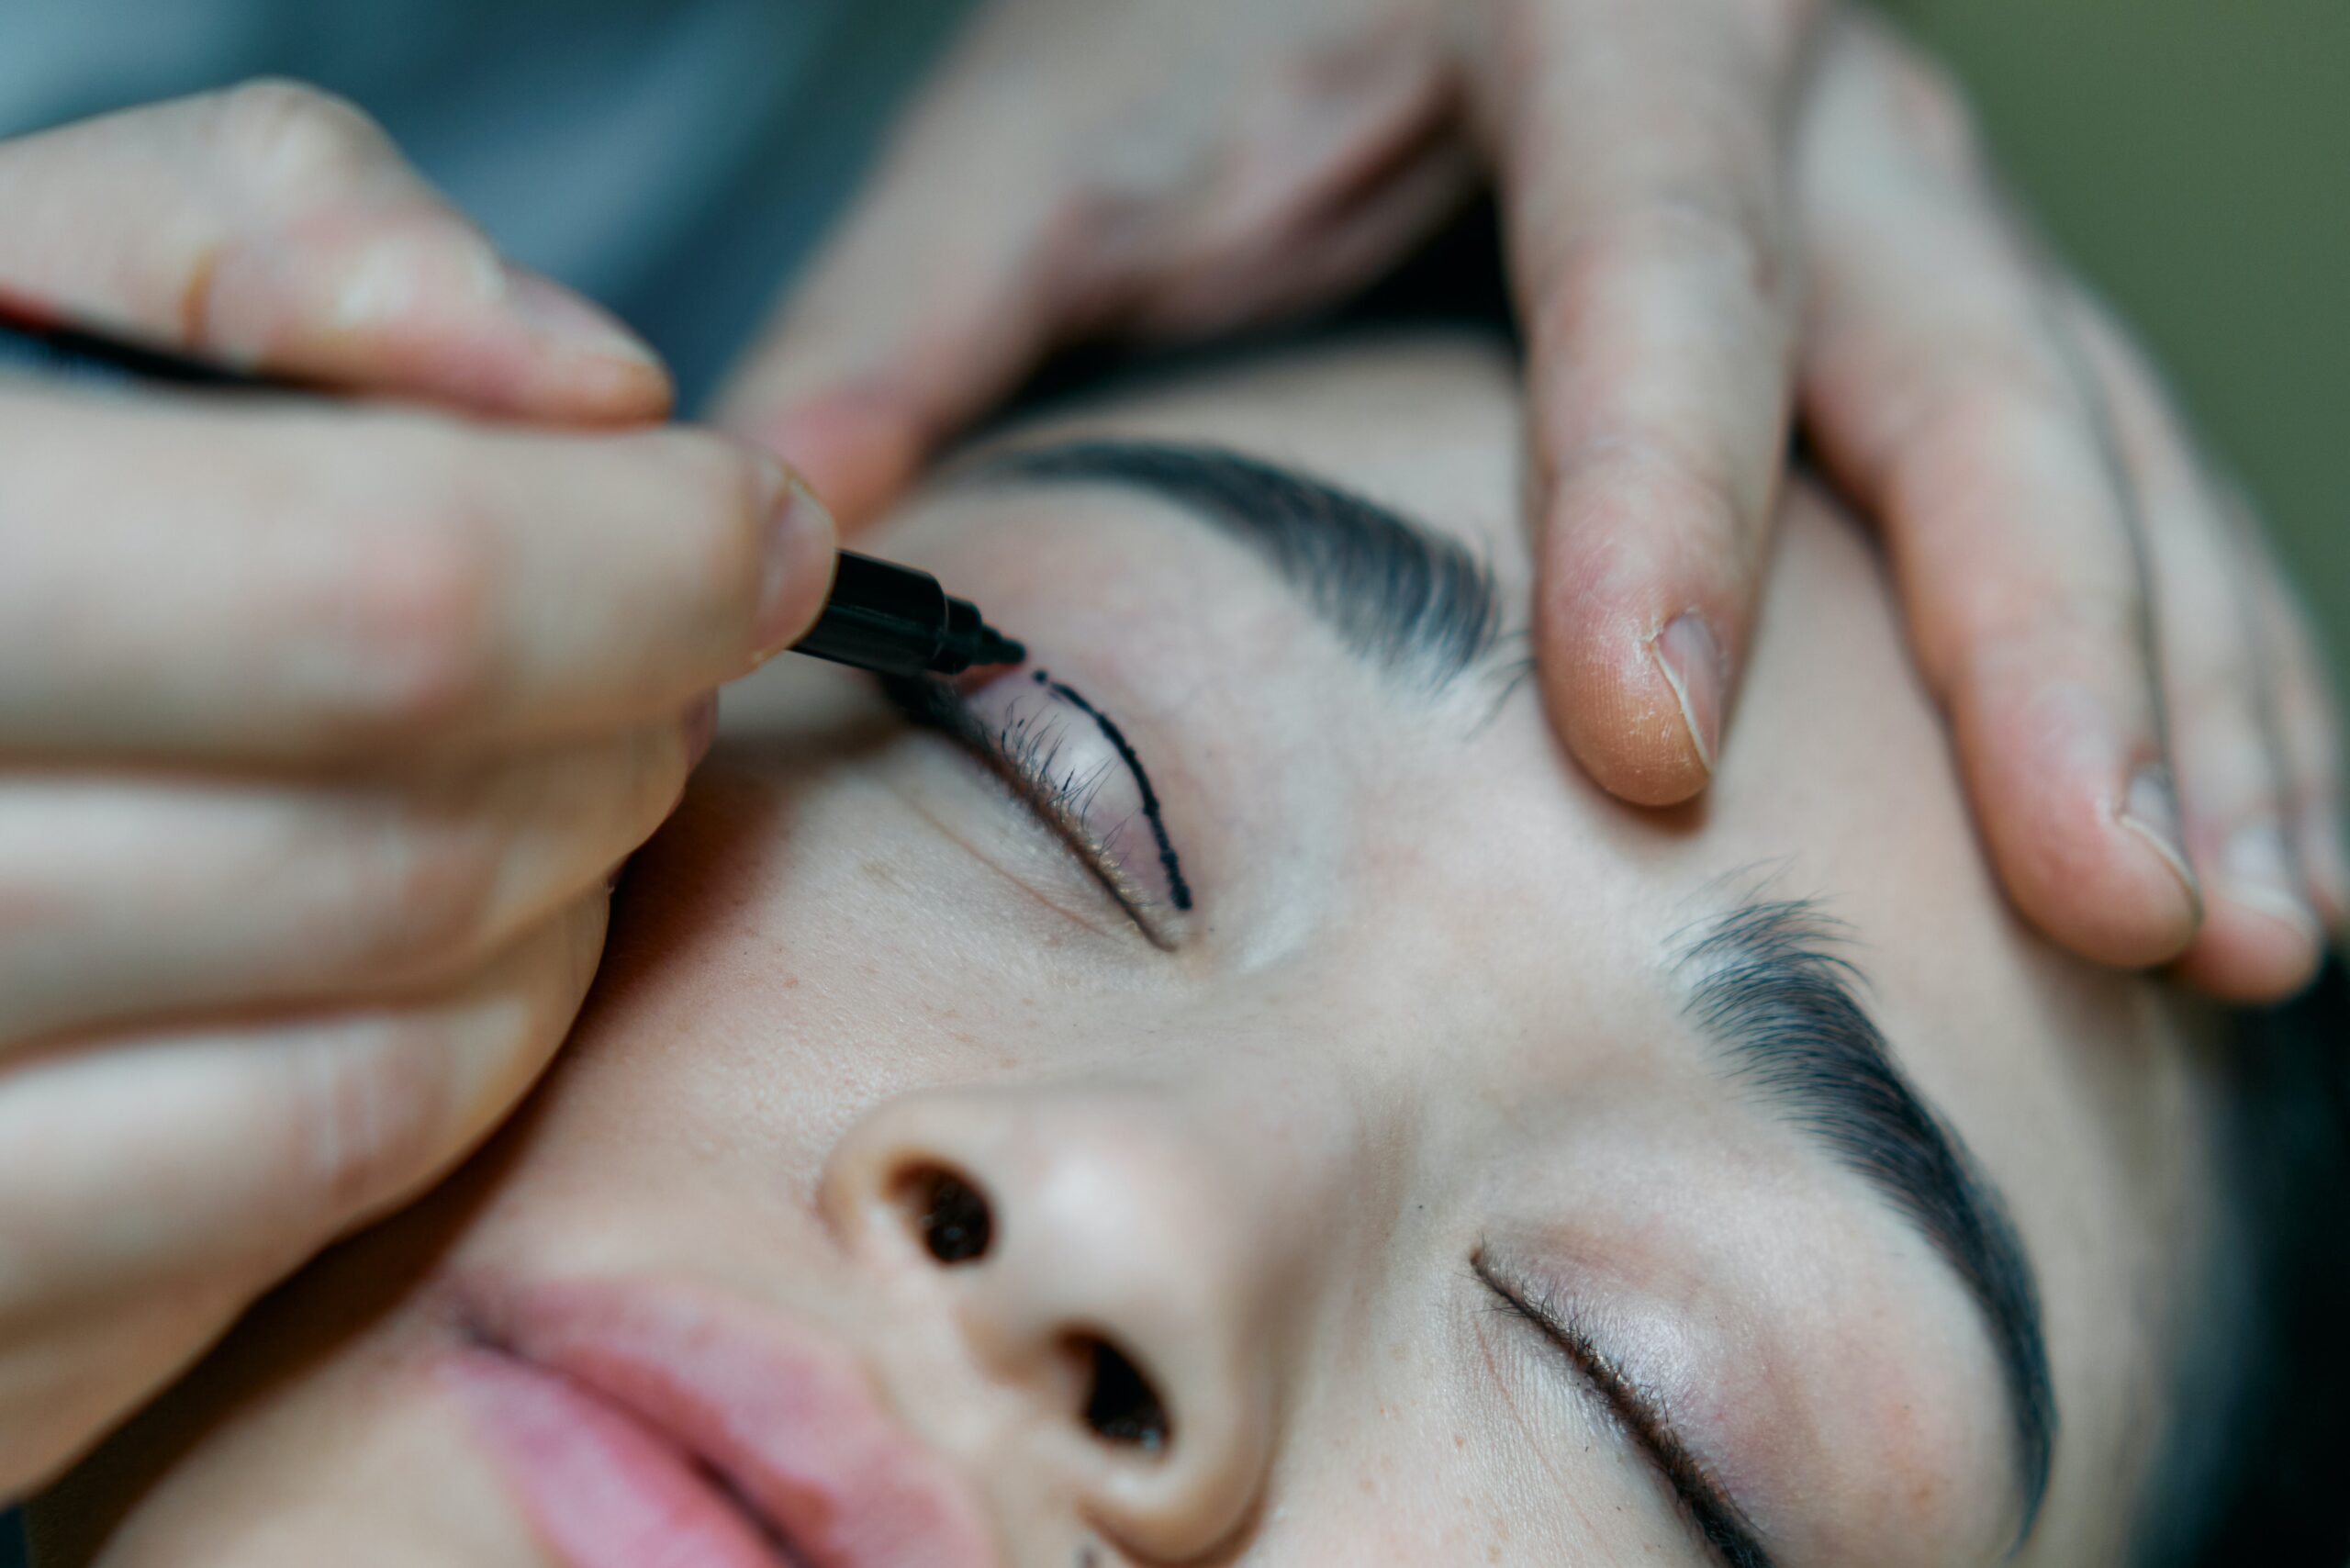 How to get insurance to pay for eyelid surgery?